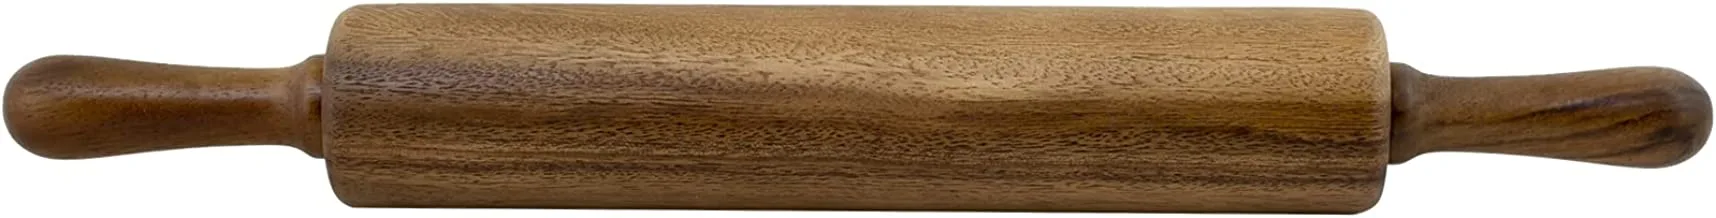 BILLI® Classic Wooden Revolving Rolling Pin 23cm - Acacia Wood Dough Roller with Handles for Baking Pasta Pizza Fondant Cookie Noodles Bread - ACA-201-9